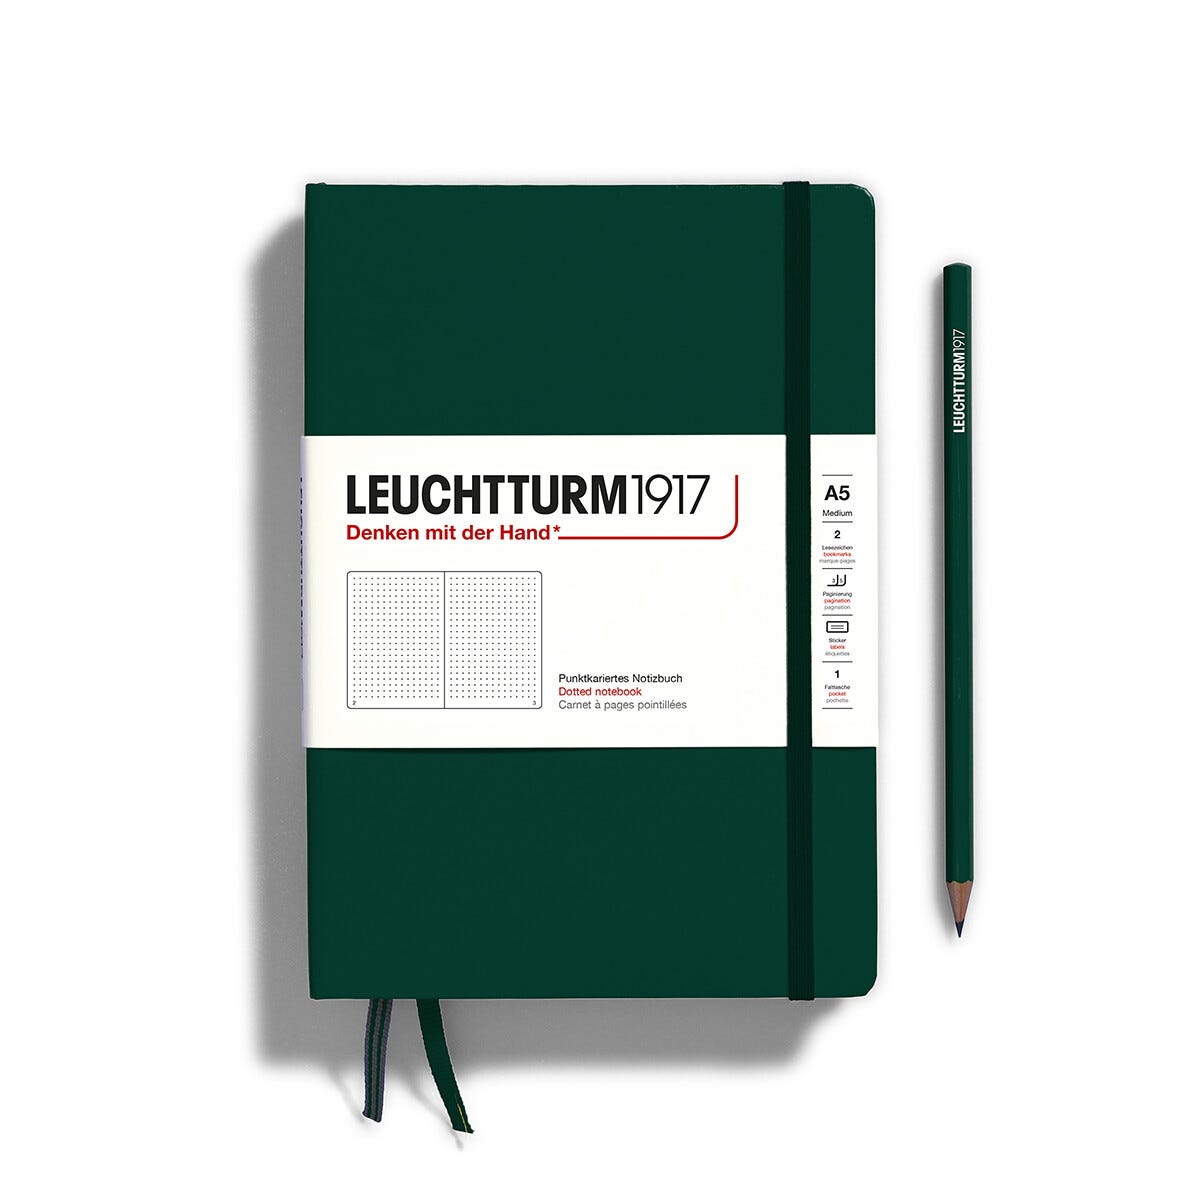 Leuchtturm 1917 Learning Journal  Learning goals, Learning, Learning  activities